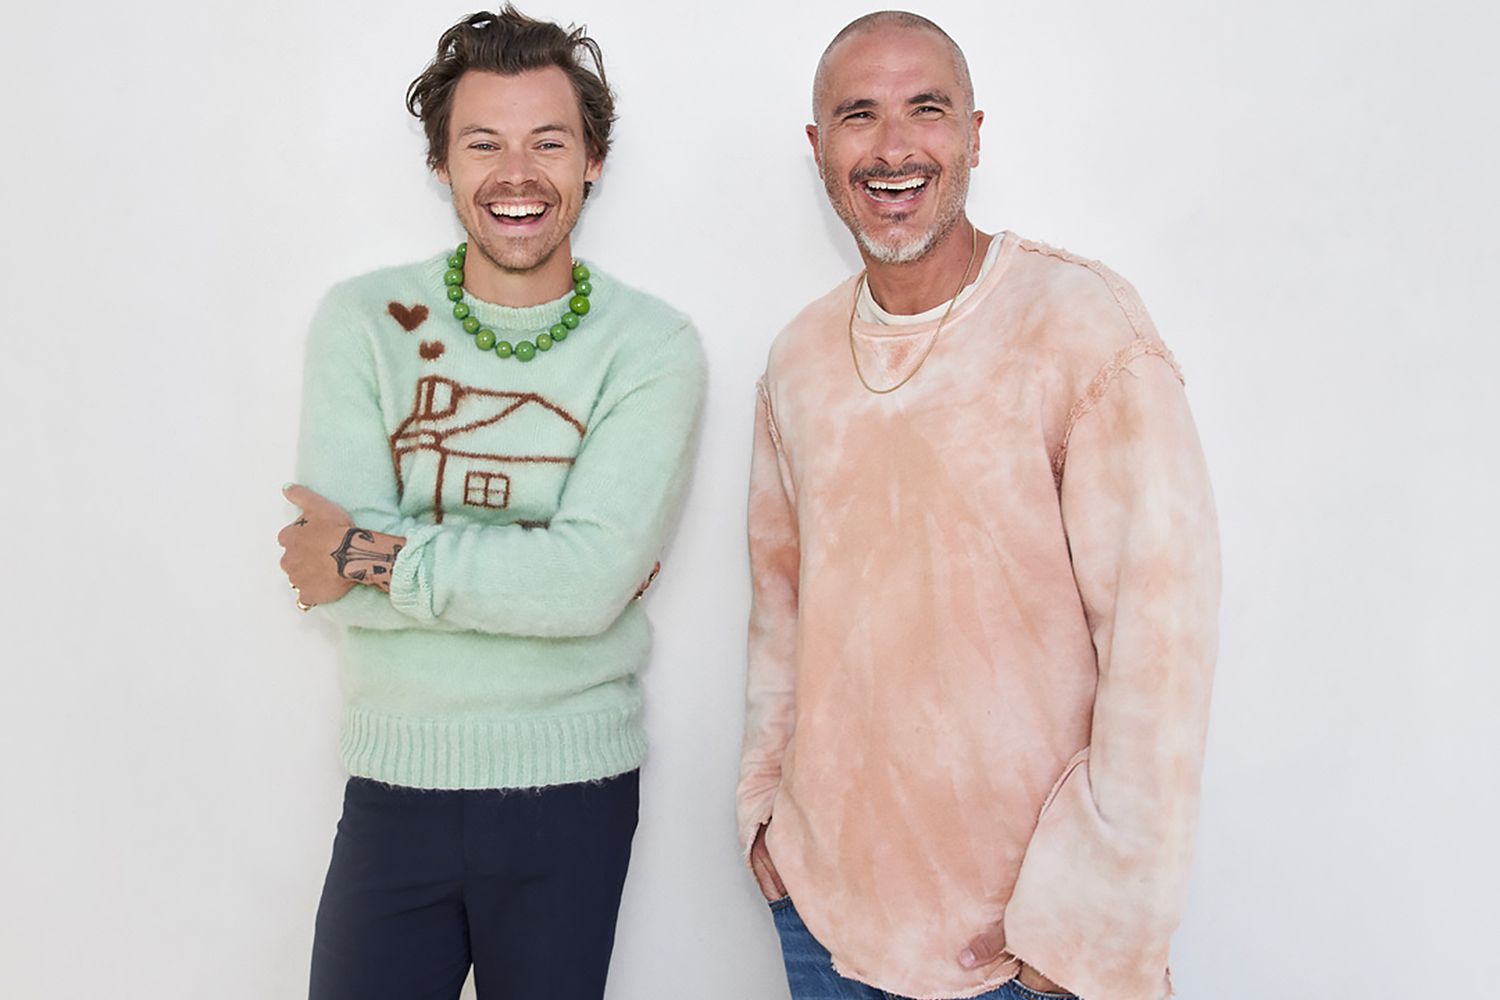 Harry Styles joins Zane Lowe on Apple Music 1 for an extensive conversation in the California desert detailing the making of his highly-anticipated third studio album ‘Harry’s House’, out this Friday. He calls the “intimately made” project his “favorite album at the moment” and discusses getting to a place where his overall happiness is no longer dependent on the success of his music. He also touches on his major takeaways from the pandemic and being “gifted this stolen time”, investing in work/life balance and being present, getting to know himself, the power of therapy and moving away from “emotionally coasting”, the evolution of his discography, gratitude for Billie Eilish, deep love for his former One Direction bandmates, commanding stadiums and Coachella, and touring safely during the pandemic. He also goes deep on the origins and songwriting process for various tracks on the new album.